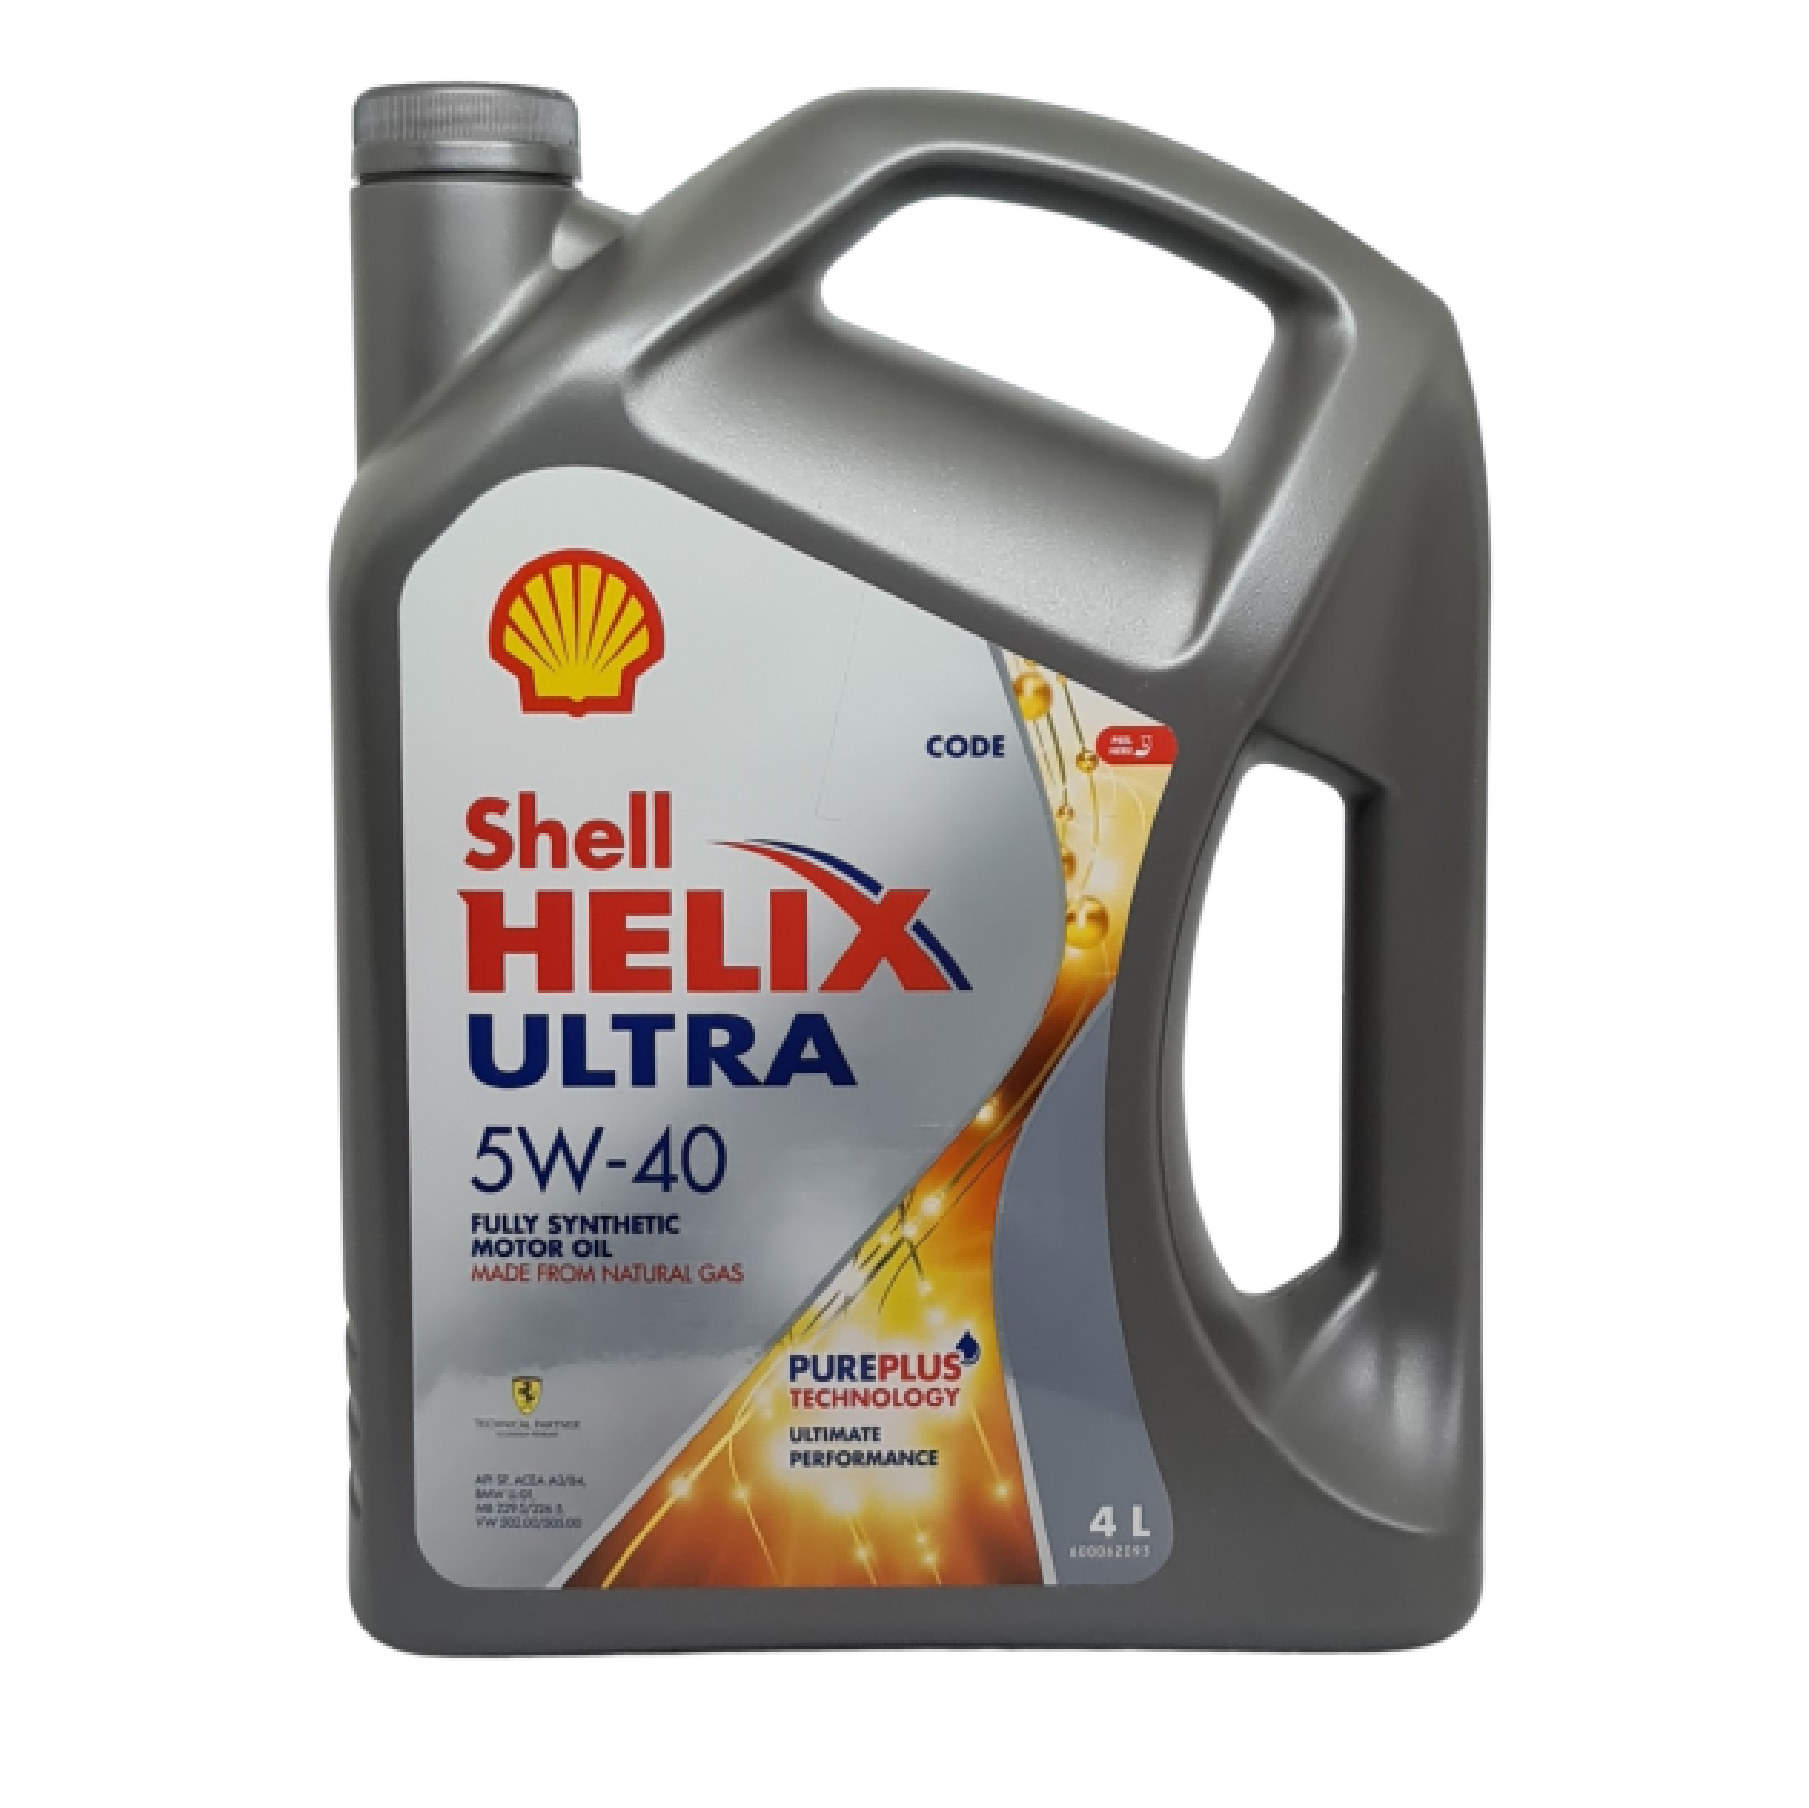 SHELL HELIX ULTRA Fully Synthetic Motor Oil 5W-40 PUREPLUS Technology 4L